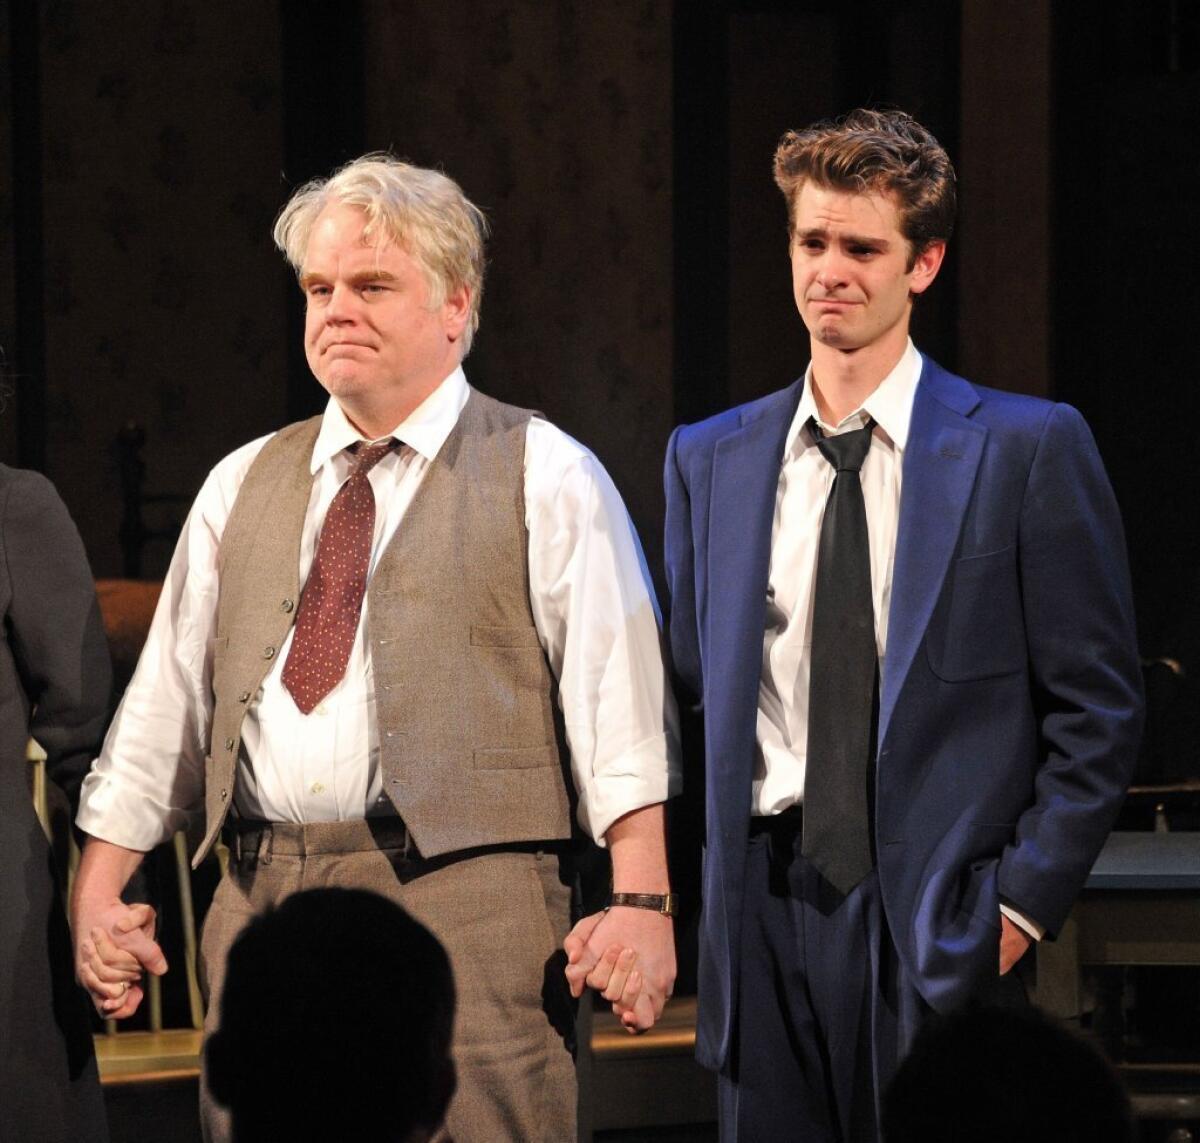 Philip Seymour Hoffman at a curtain call for "Death of a Salesman" on Broadway, with costar Andrew Garfield.